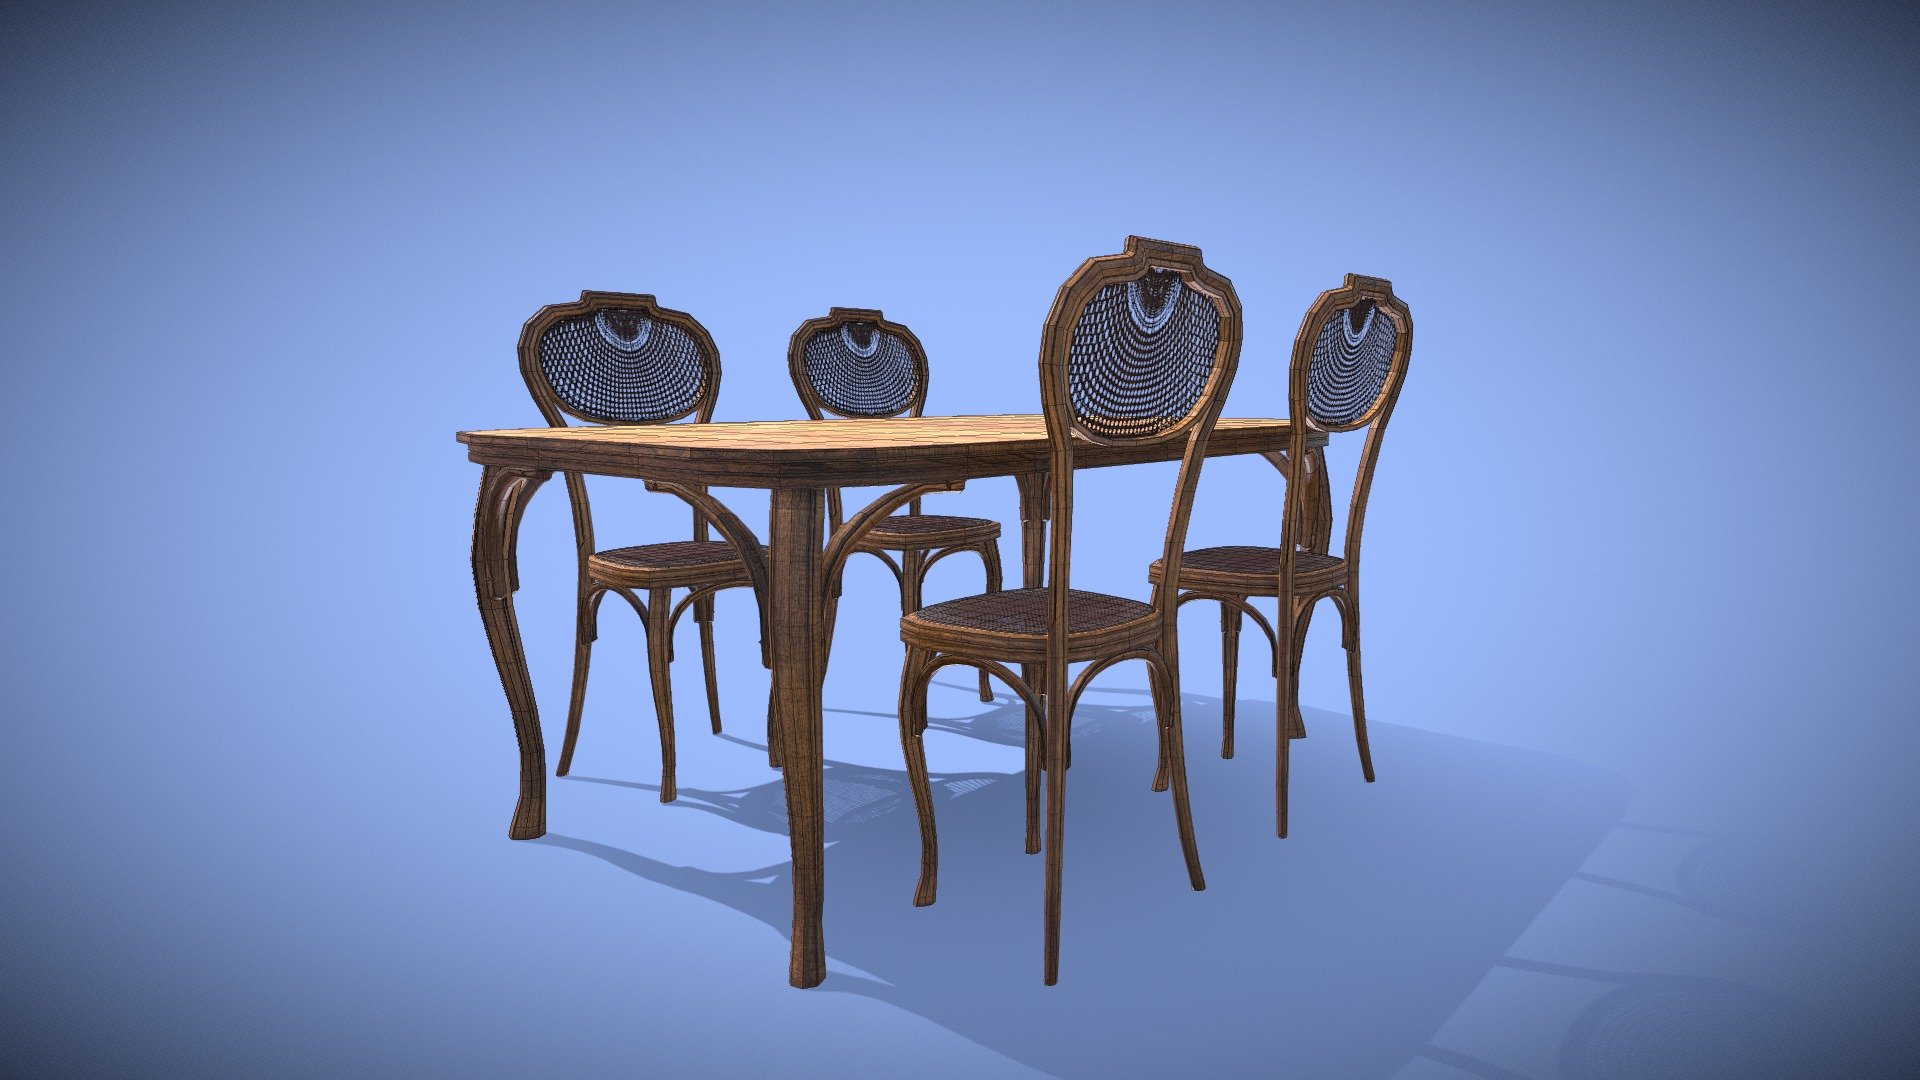 A realistic 3D model of an Art Nouveau table and chairs from the beginning of the 20th century. This model was made using a real life reference, keeping the accurate look and original dimensions.




Textures made with Surface Painter 2

Modelled in Maya 2017

Renders and shaders made with Arnold 2.0, now native to maya

Shader used: aiStandardSurface

Clean modelling: quads only, clean scene with a clear naming convention

textures:




chair_DIF.1001.png: 4096 x 4096

chair_NOR.1001.png: 4096 x 4096

chair_SPEC.1001.png: 4096 x 4096

wicker_BUP.1001.png: 2048 x 2048

wicker_BUP.1002.png: 2048 x 2048

wicker_DIF.1001.png: 2048 x 2048

wicker_DIF.1002.png: 2048 x 2048

wicker_OPA.1001.png: 2048 x 2048

wicker_OPA.1002.png: 2048 x 2048

table_DIF.1001.png: 4096 x 4096

table_NOR.1001.png: 4096 x 4096

table_SPEC.1001.png: 4096 x 4096

Please Note:




The model was originally created in Maya, using Arnold shaders. These files are added to this asset as additional file.
 - Art Nouveau Dining Table and Chairs - Buy Royalty Free 3D model by lillyth 3d model